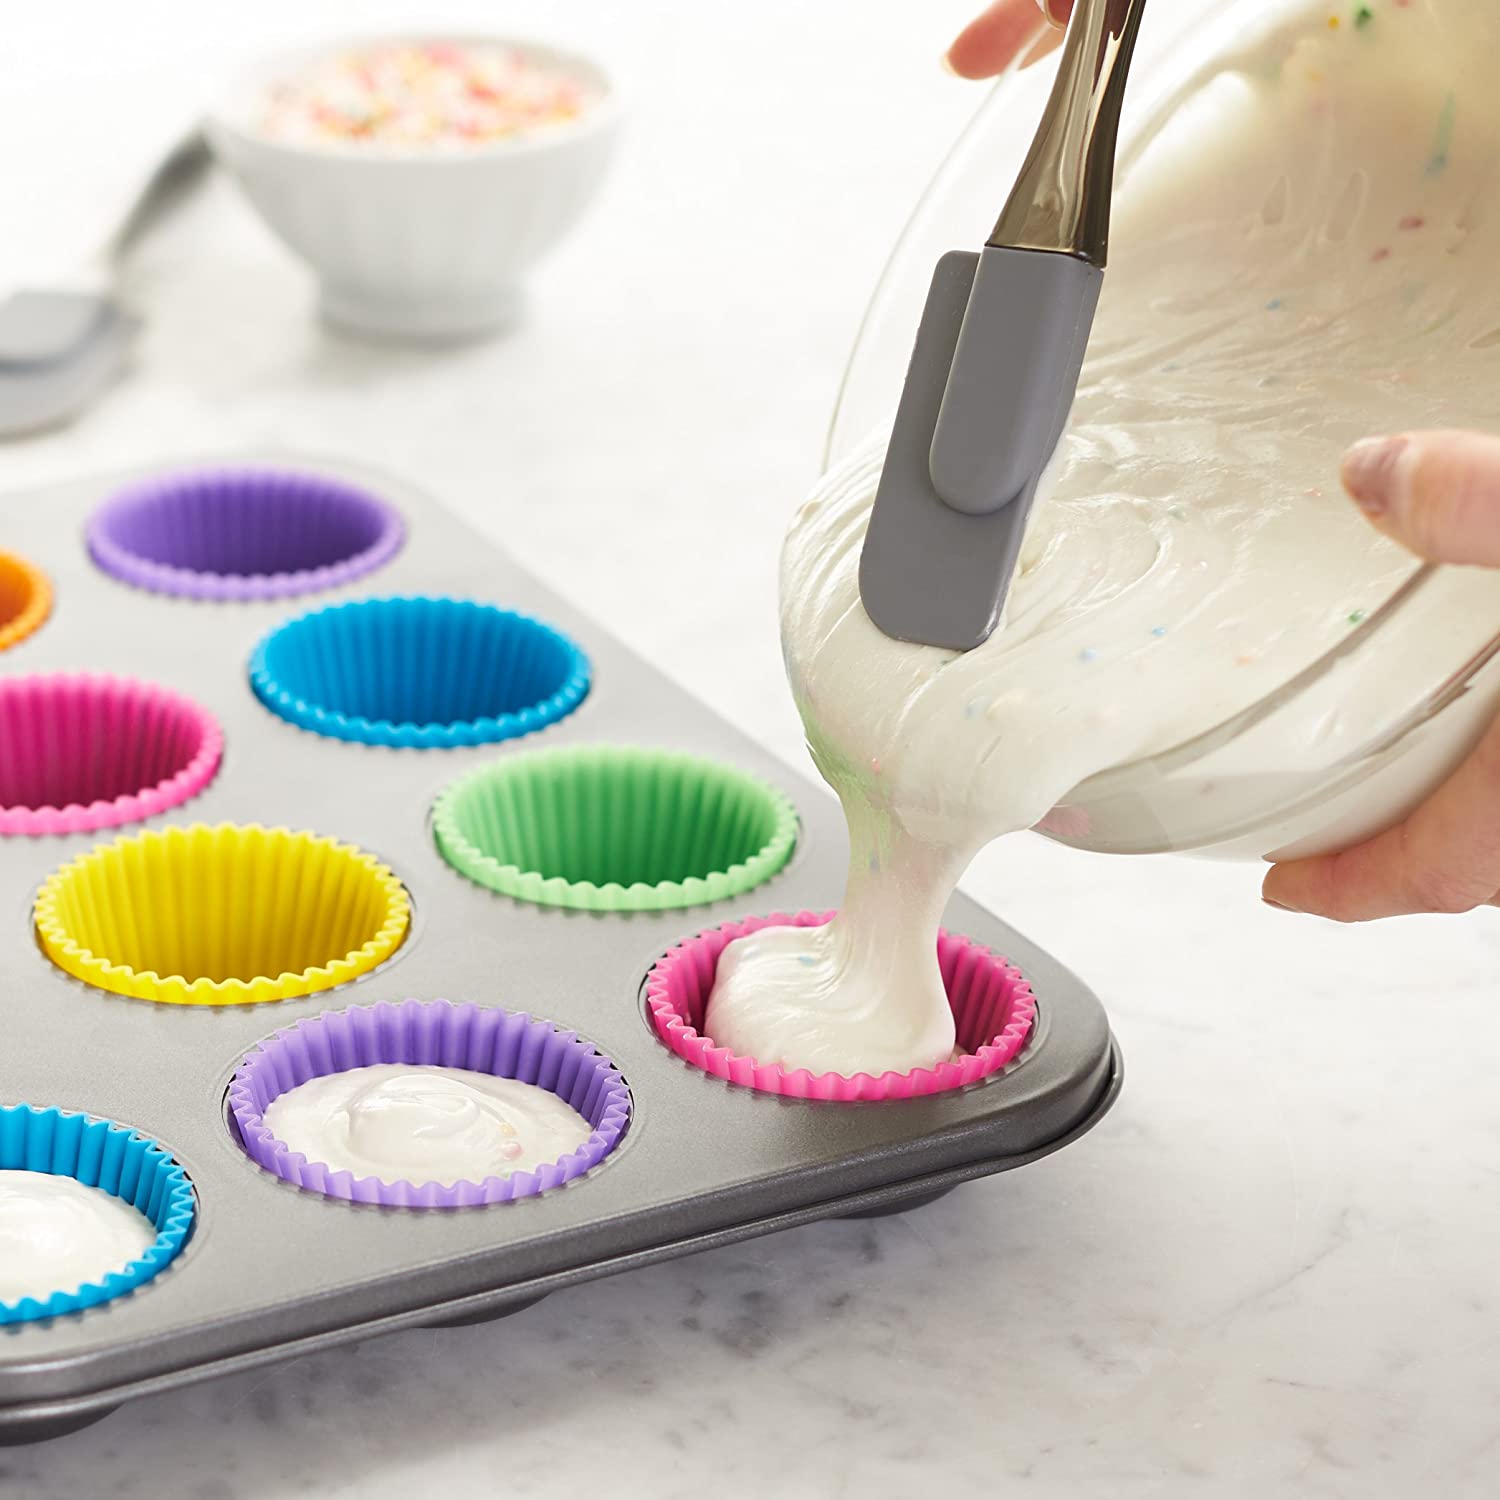 Kasmoire Reusable Silicone Baking Cups,Muffin Liners Pack of 12,Multicolor